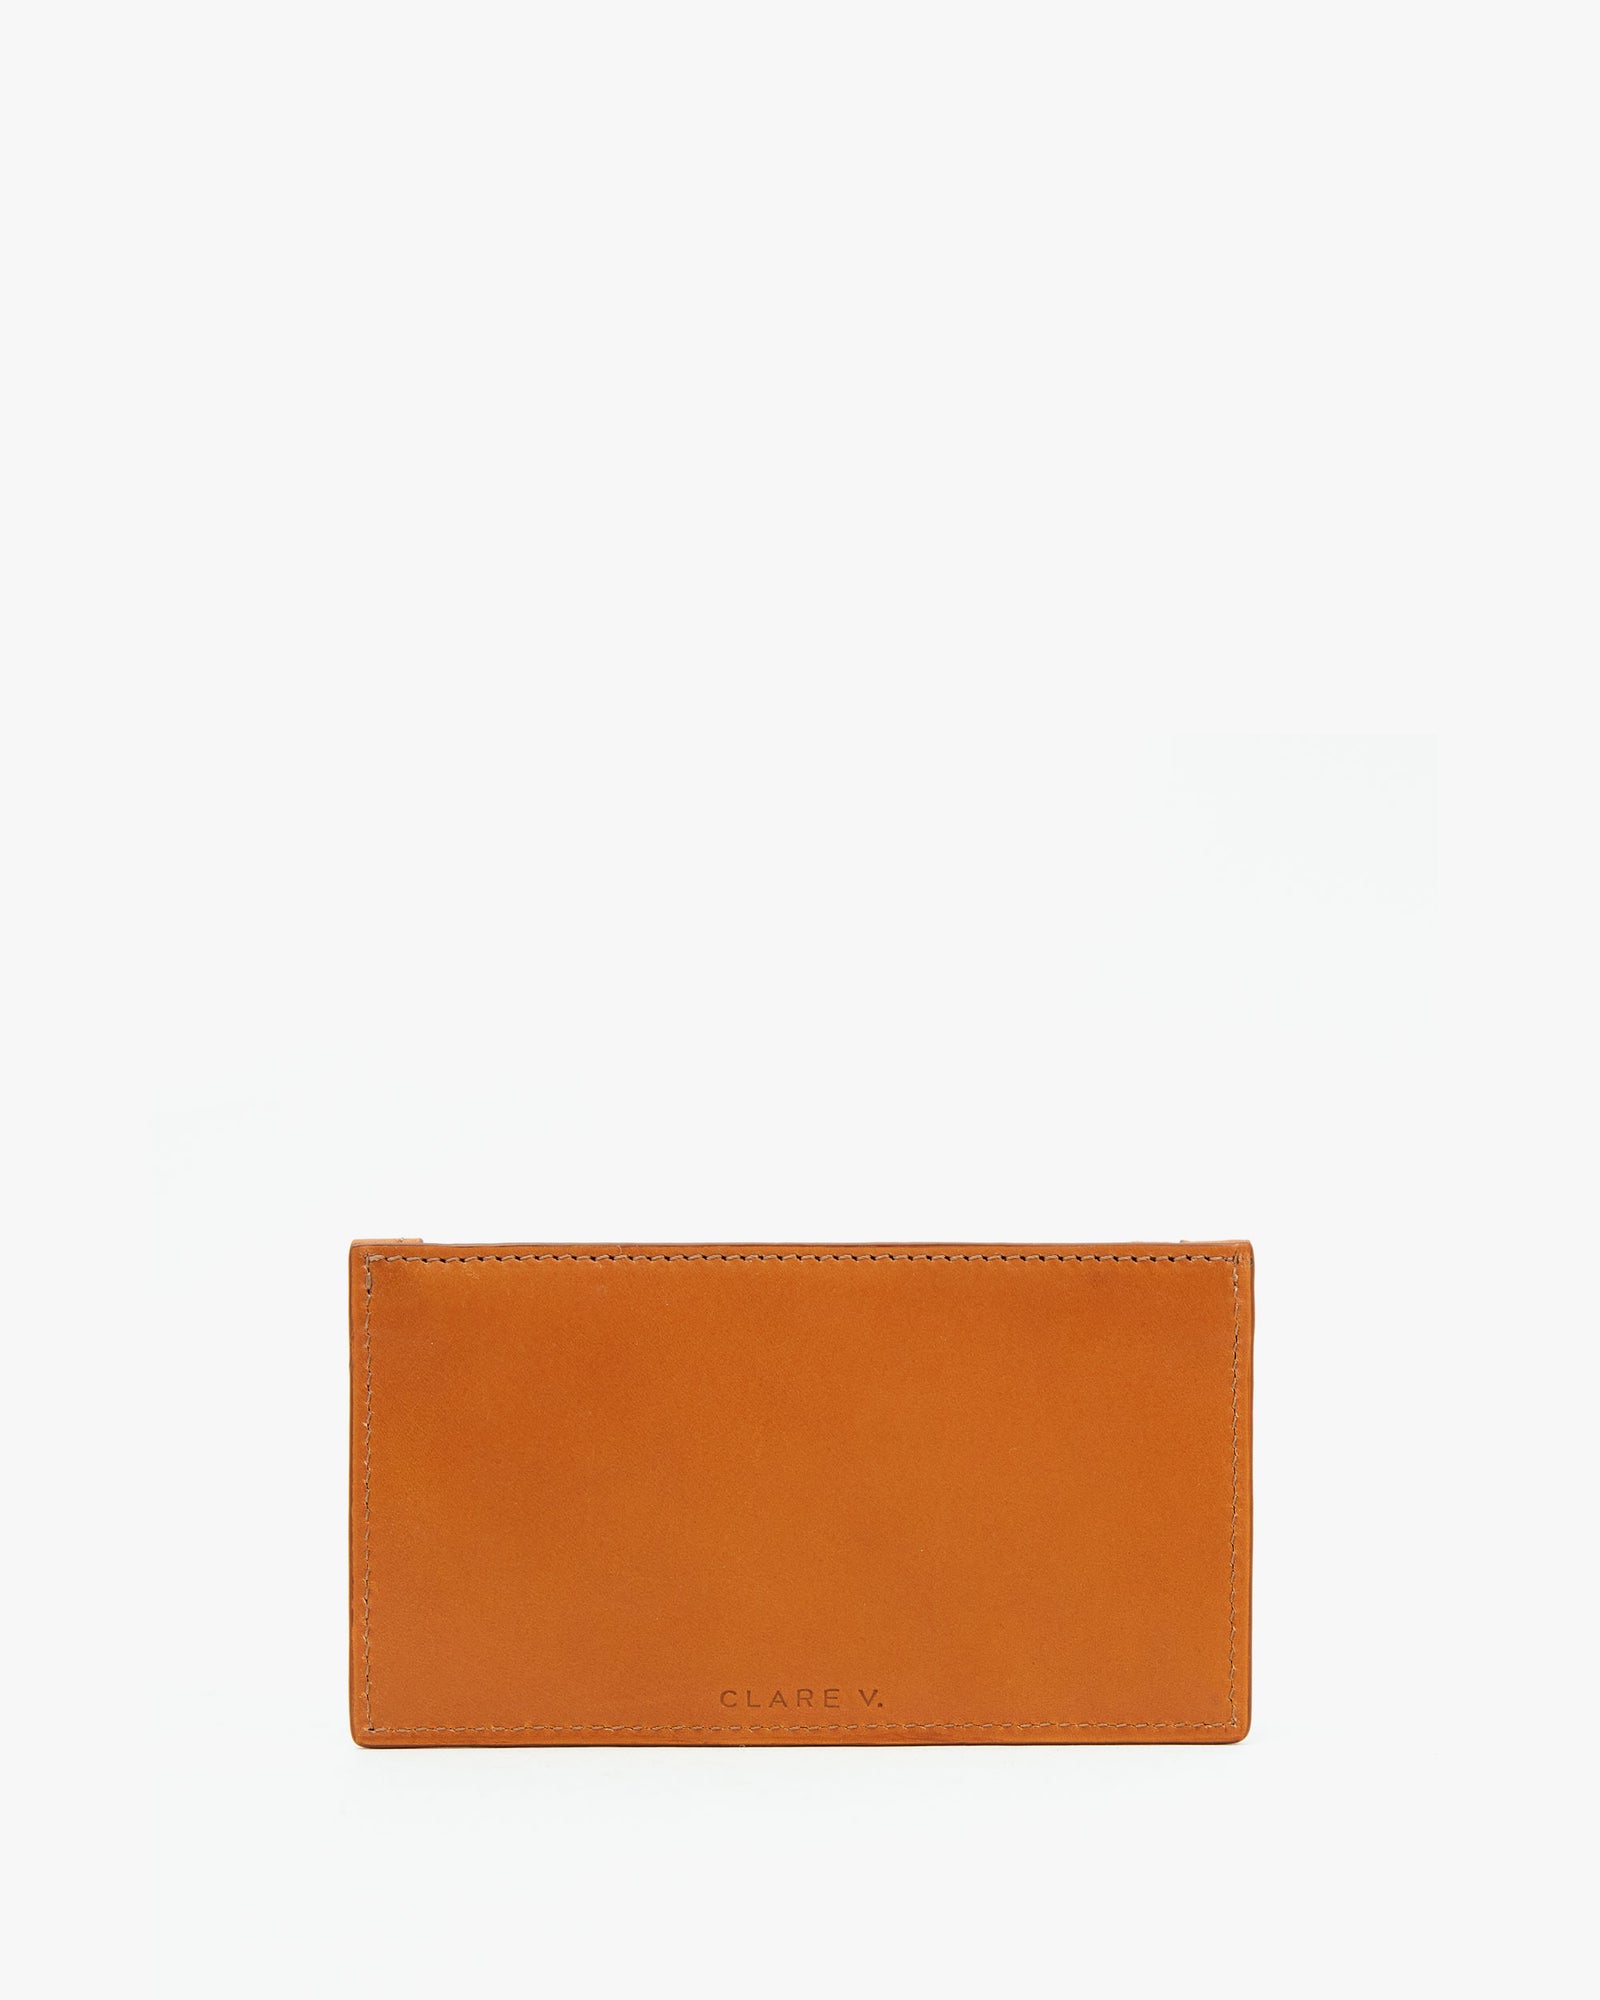 back image of the Cuoio Card Zip Wallet